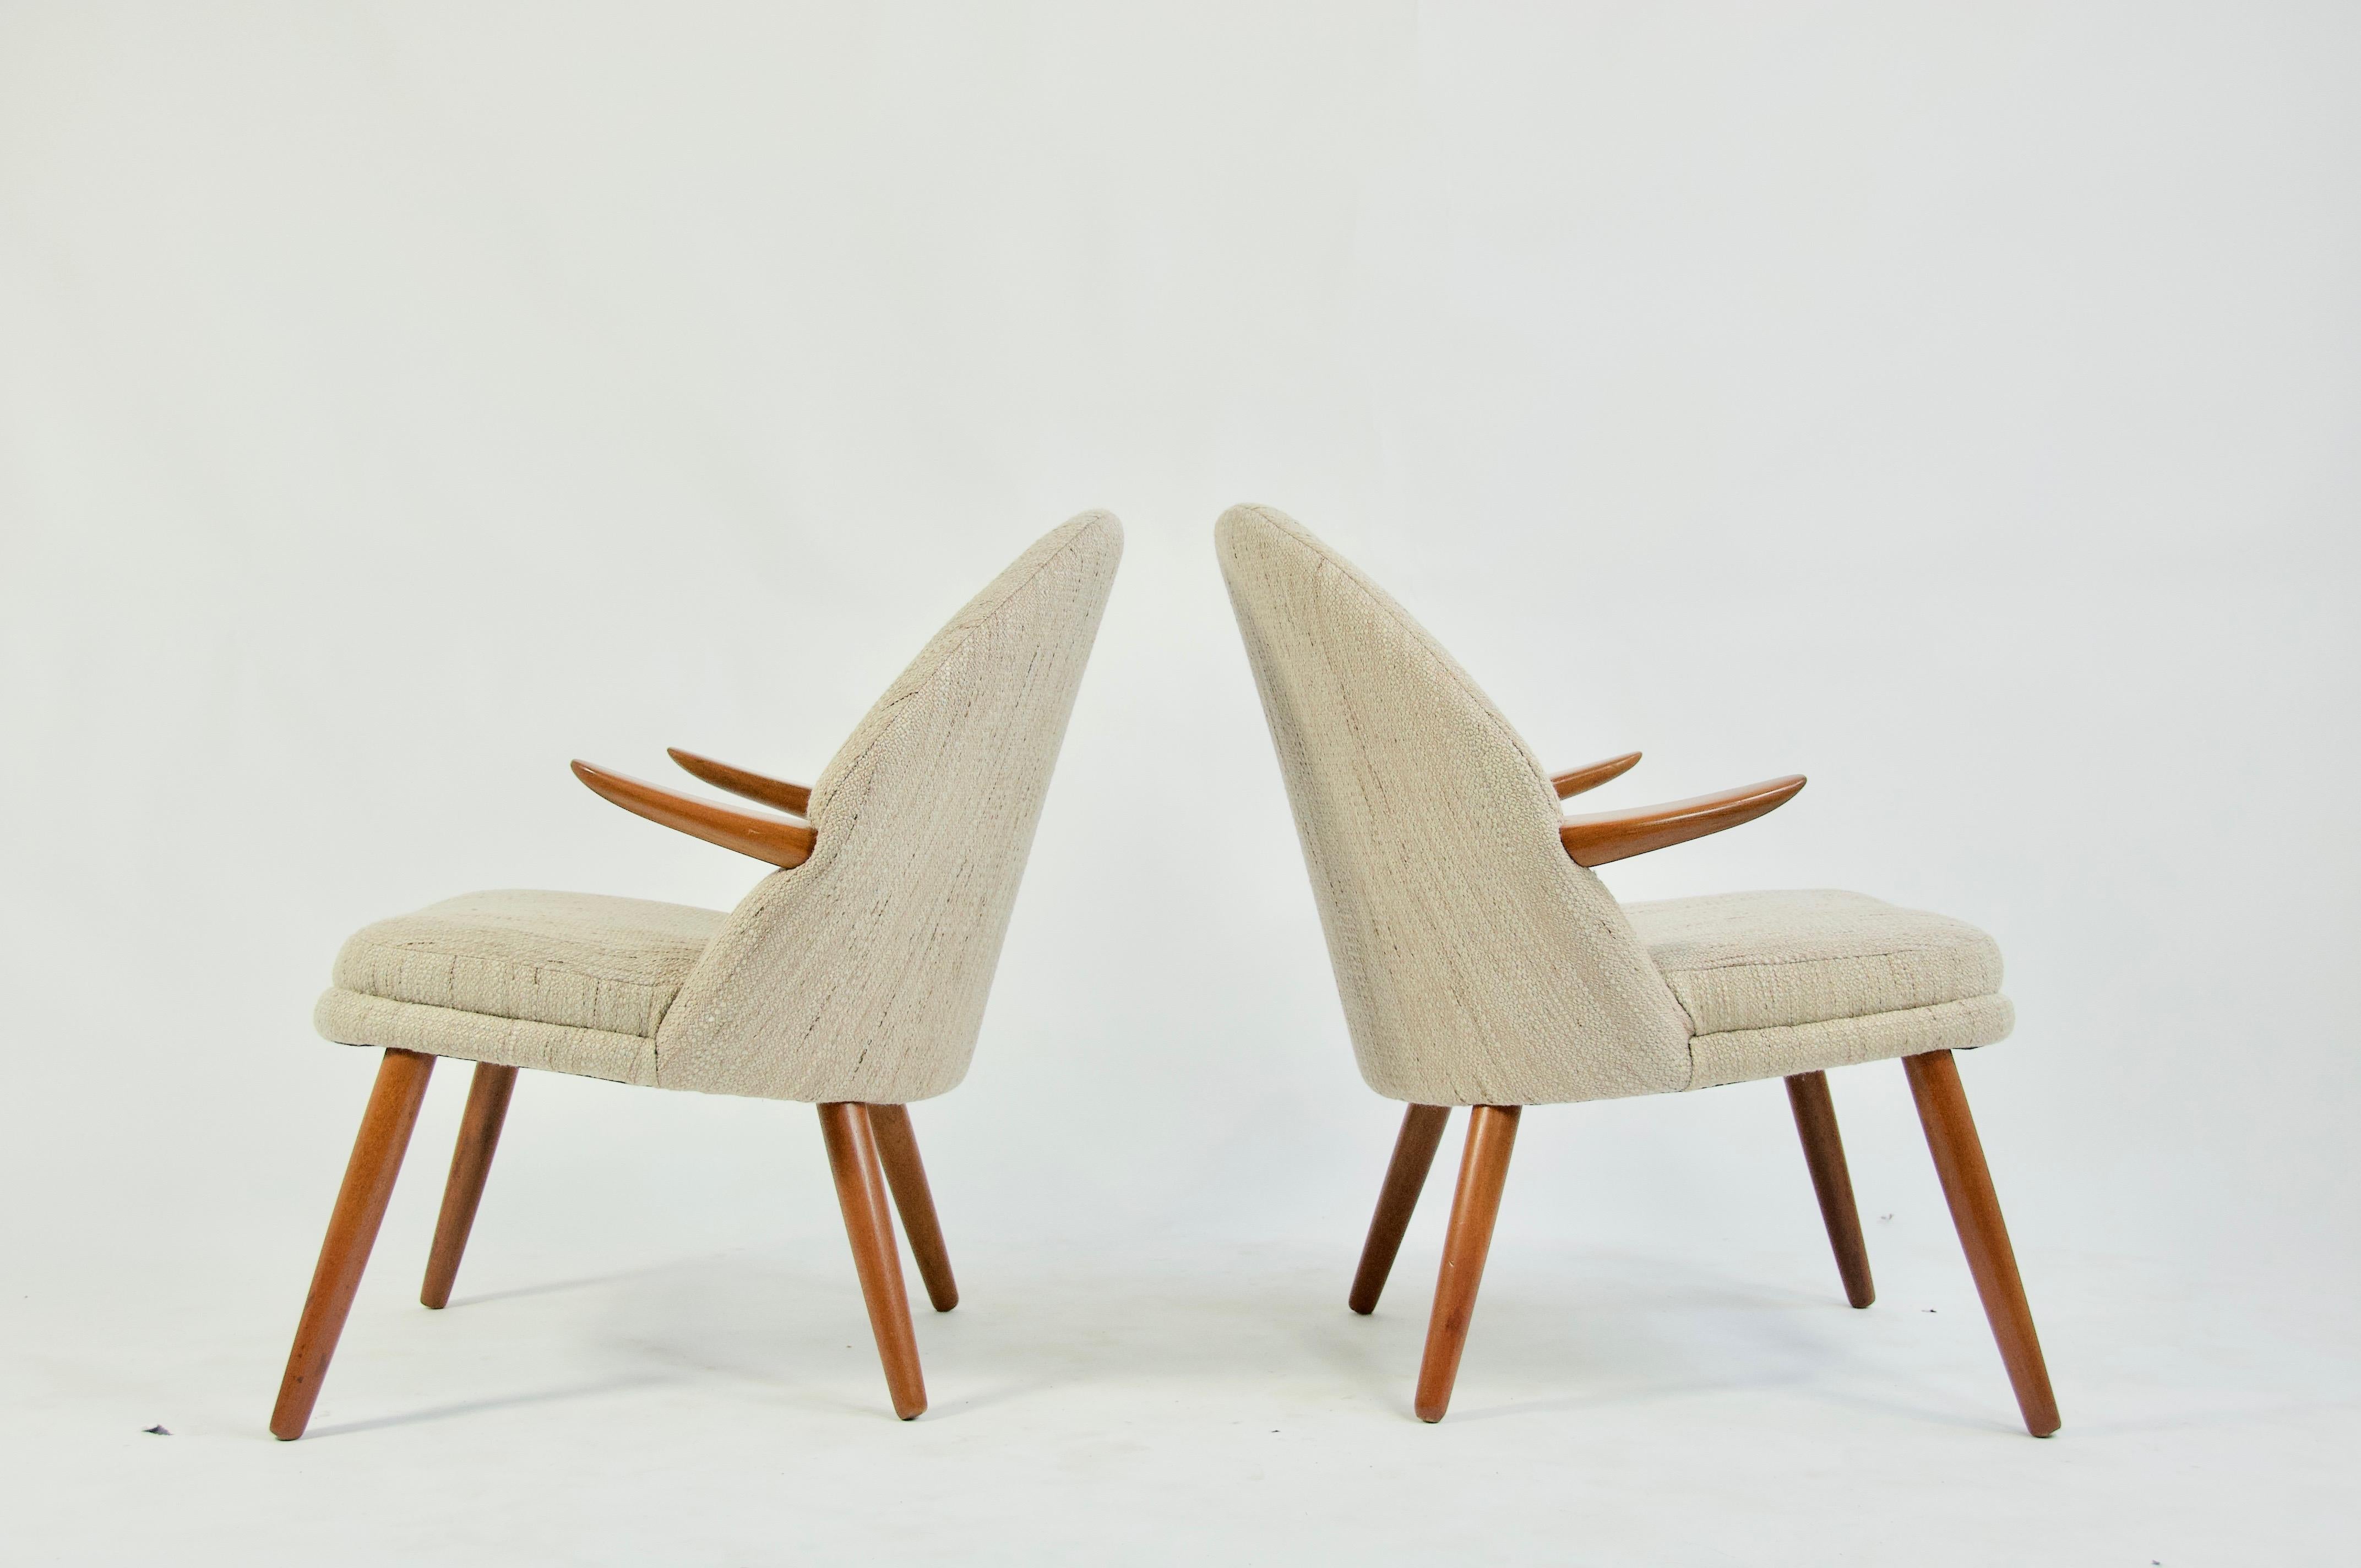 Pair of Kurt Olsen Danish Teak Lounge Chairs In Good Condition For Sale In Turners Falls, MA